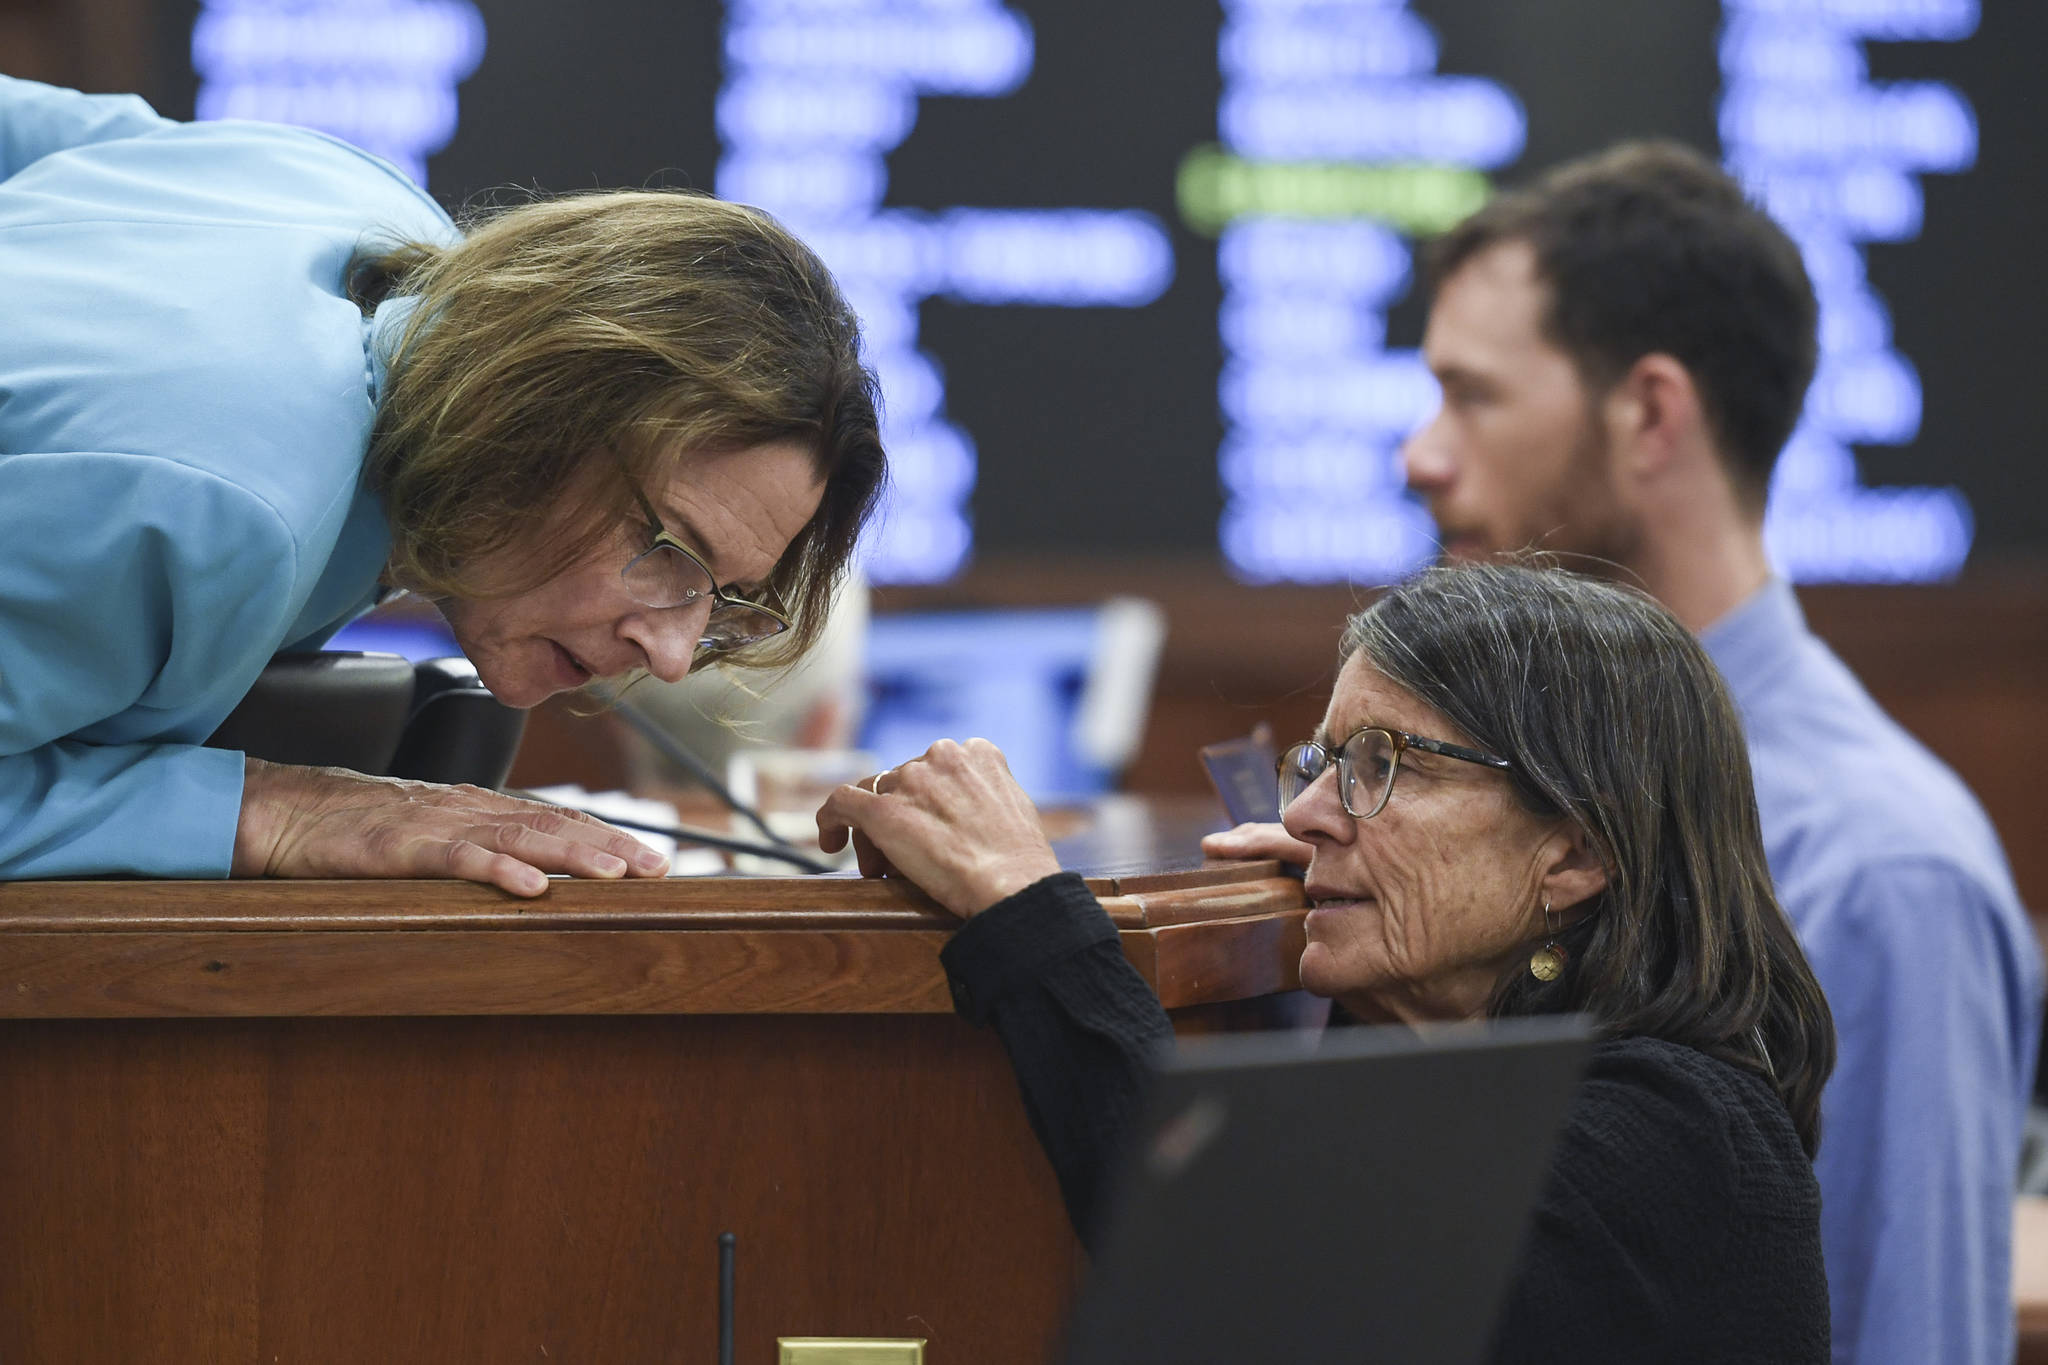 Senate President Cathy Giessel, R-Anchorage, left, leans in to listen to Rep. Jennifer Johnston, R-Anchorage, during a Joint Session of Alaska Legislature at the Capitol on Thursday, July 11, 2019, to debate and vote on an override of Gov. Mike Dunleavy’s budget vetoes. The vote didn’t take place because not enough legislators attended. (Michael Penn | Juneau Empire)